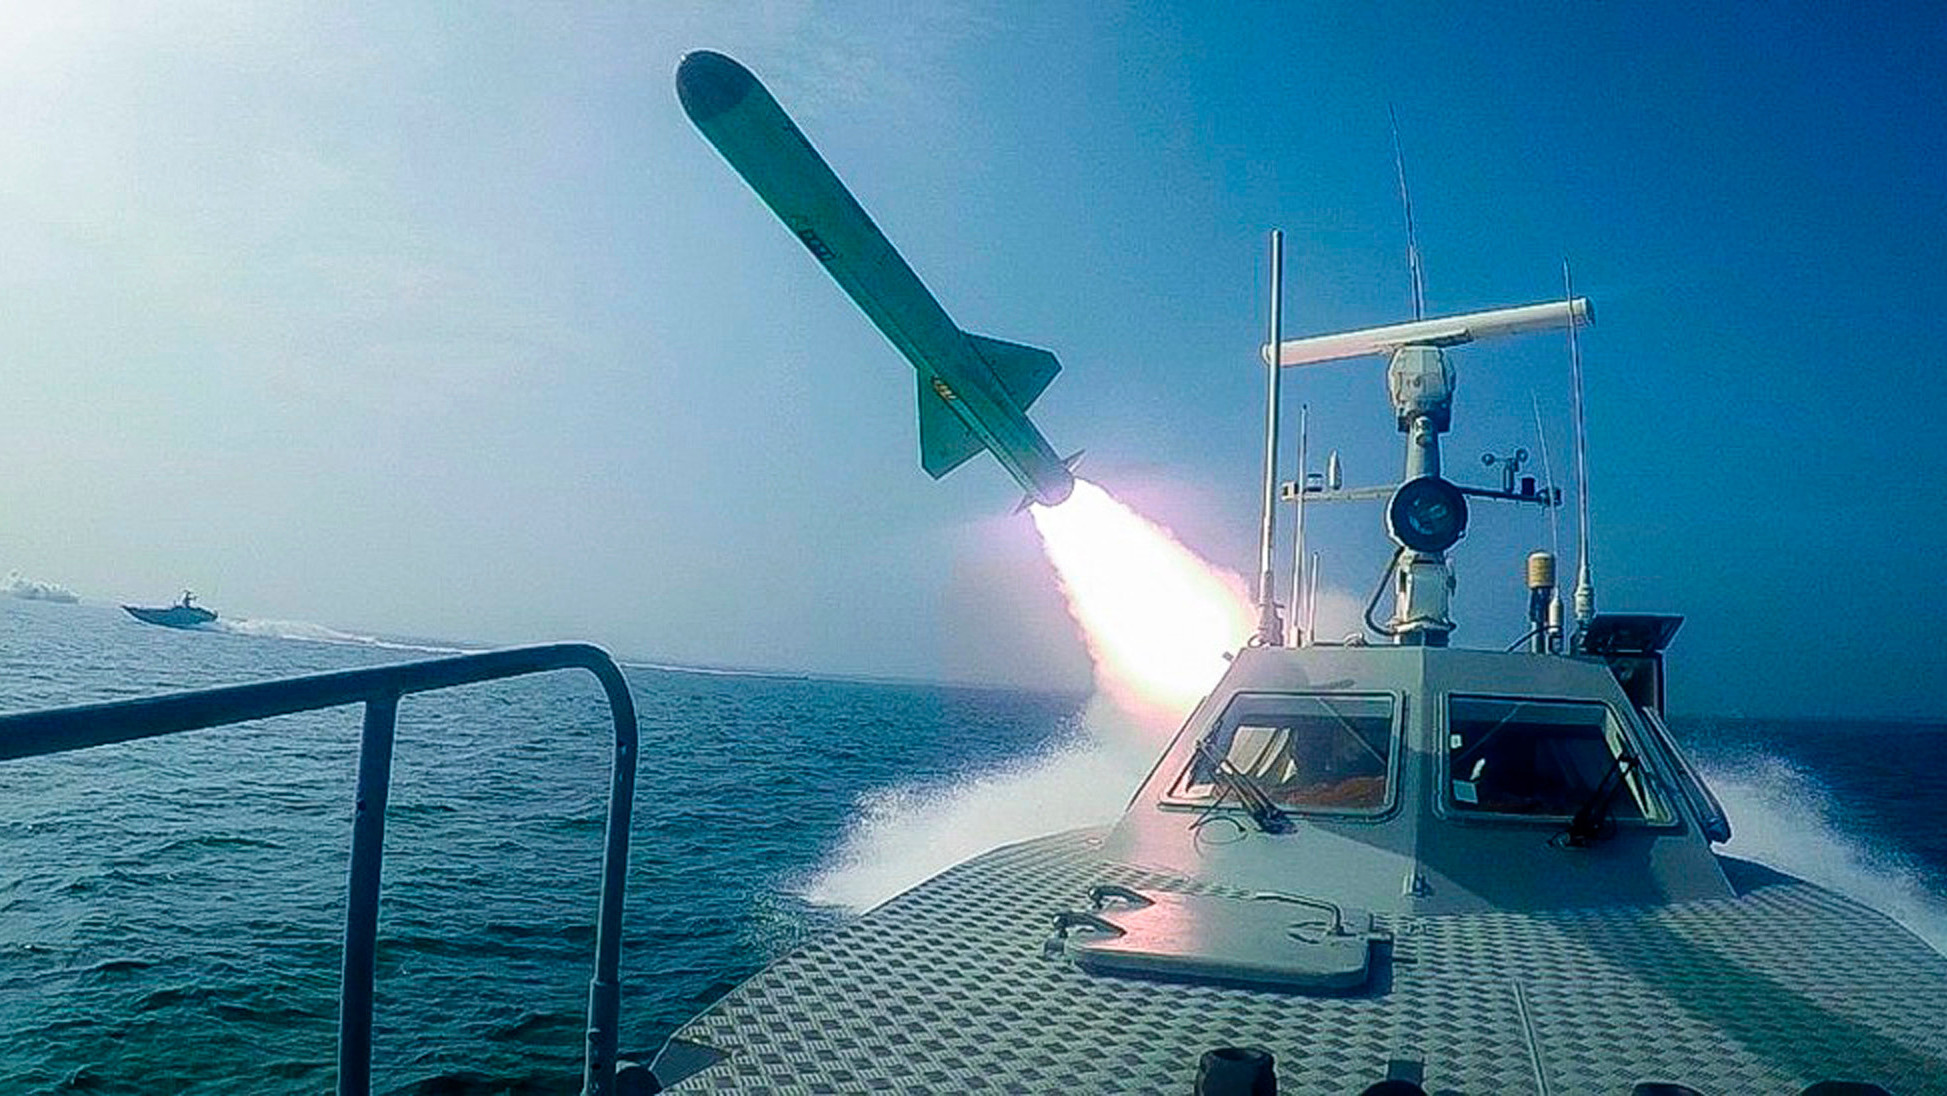 An IRGC speedboat launching missiles during live-fire exercises in a photo released on July 28, 2020. This photo was released by the IRGC and cannot be independently verified (Photo: IRGC, AP)